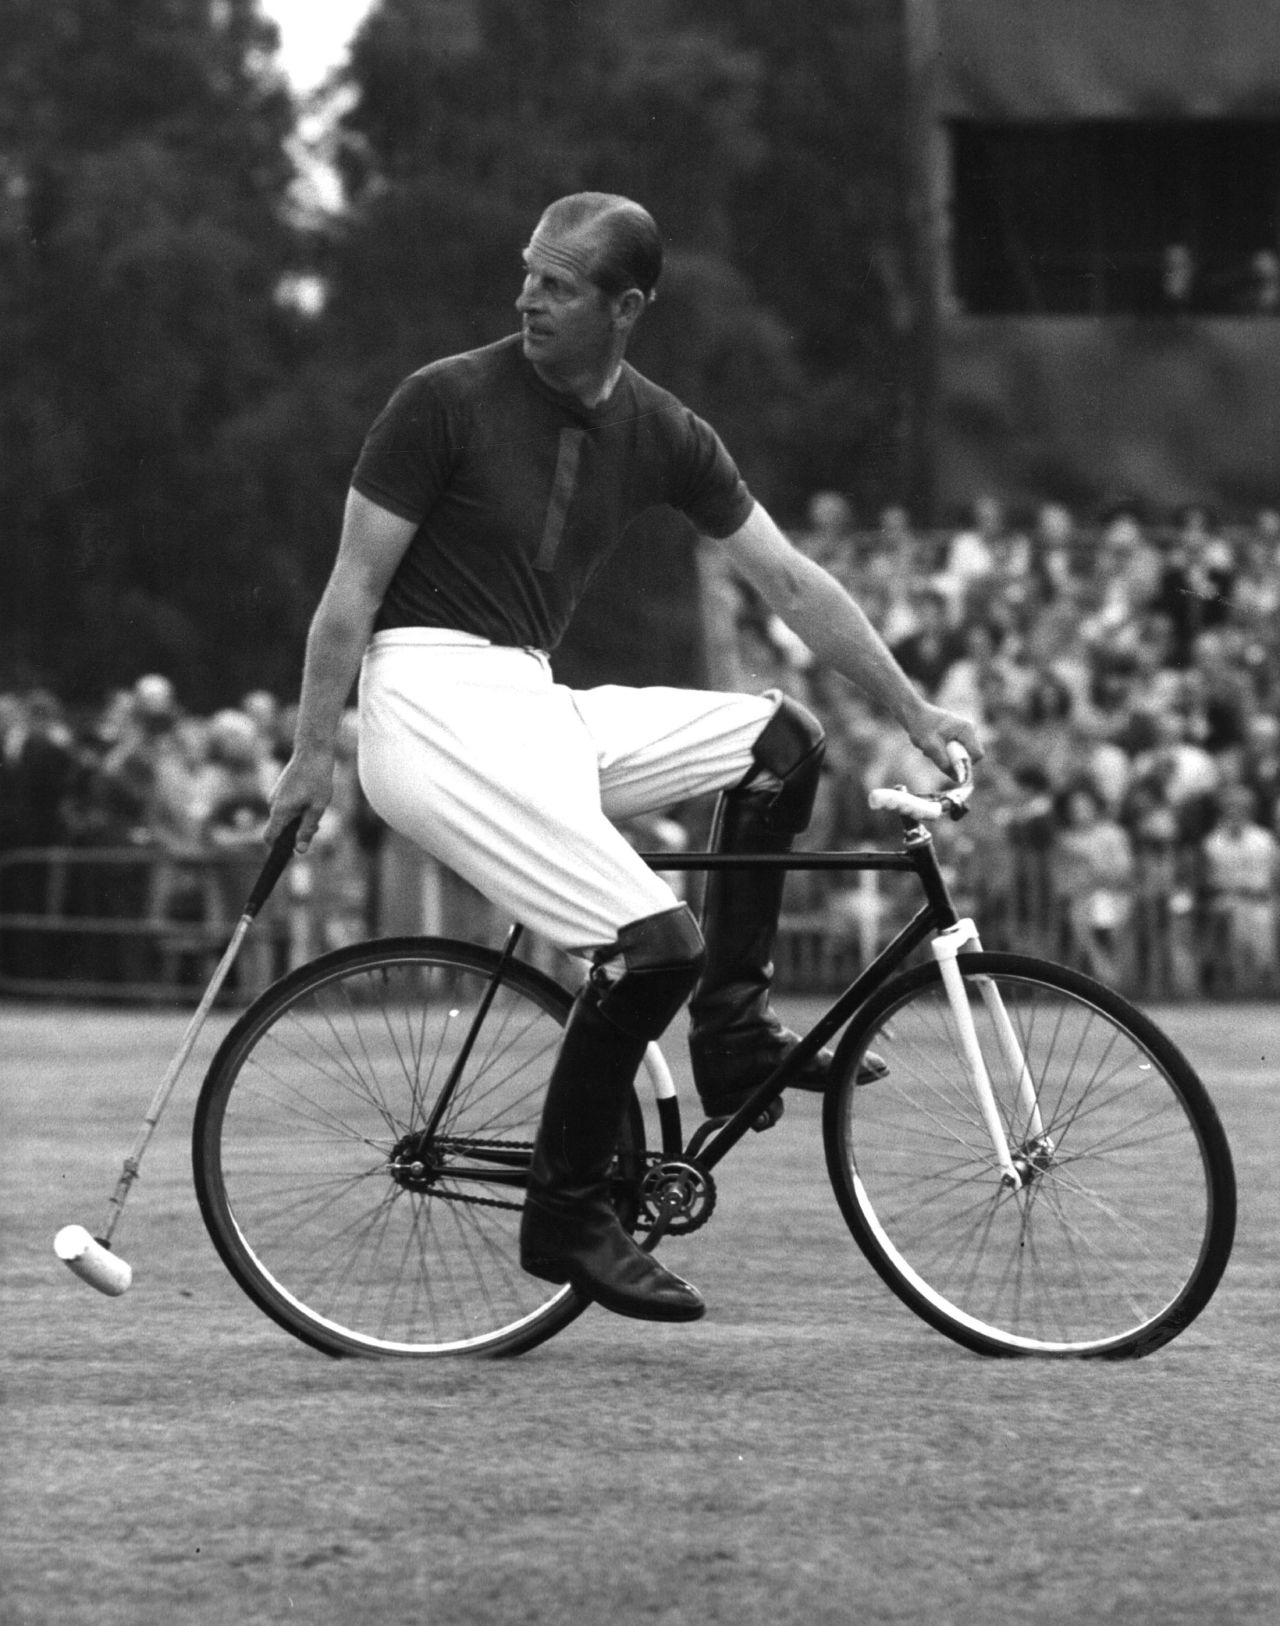 Prince Philip competes in a bicycle polo match in August 1967.